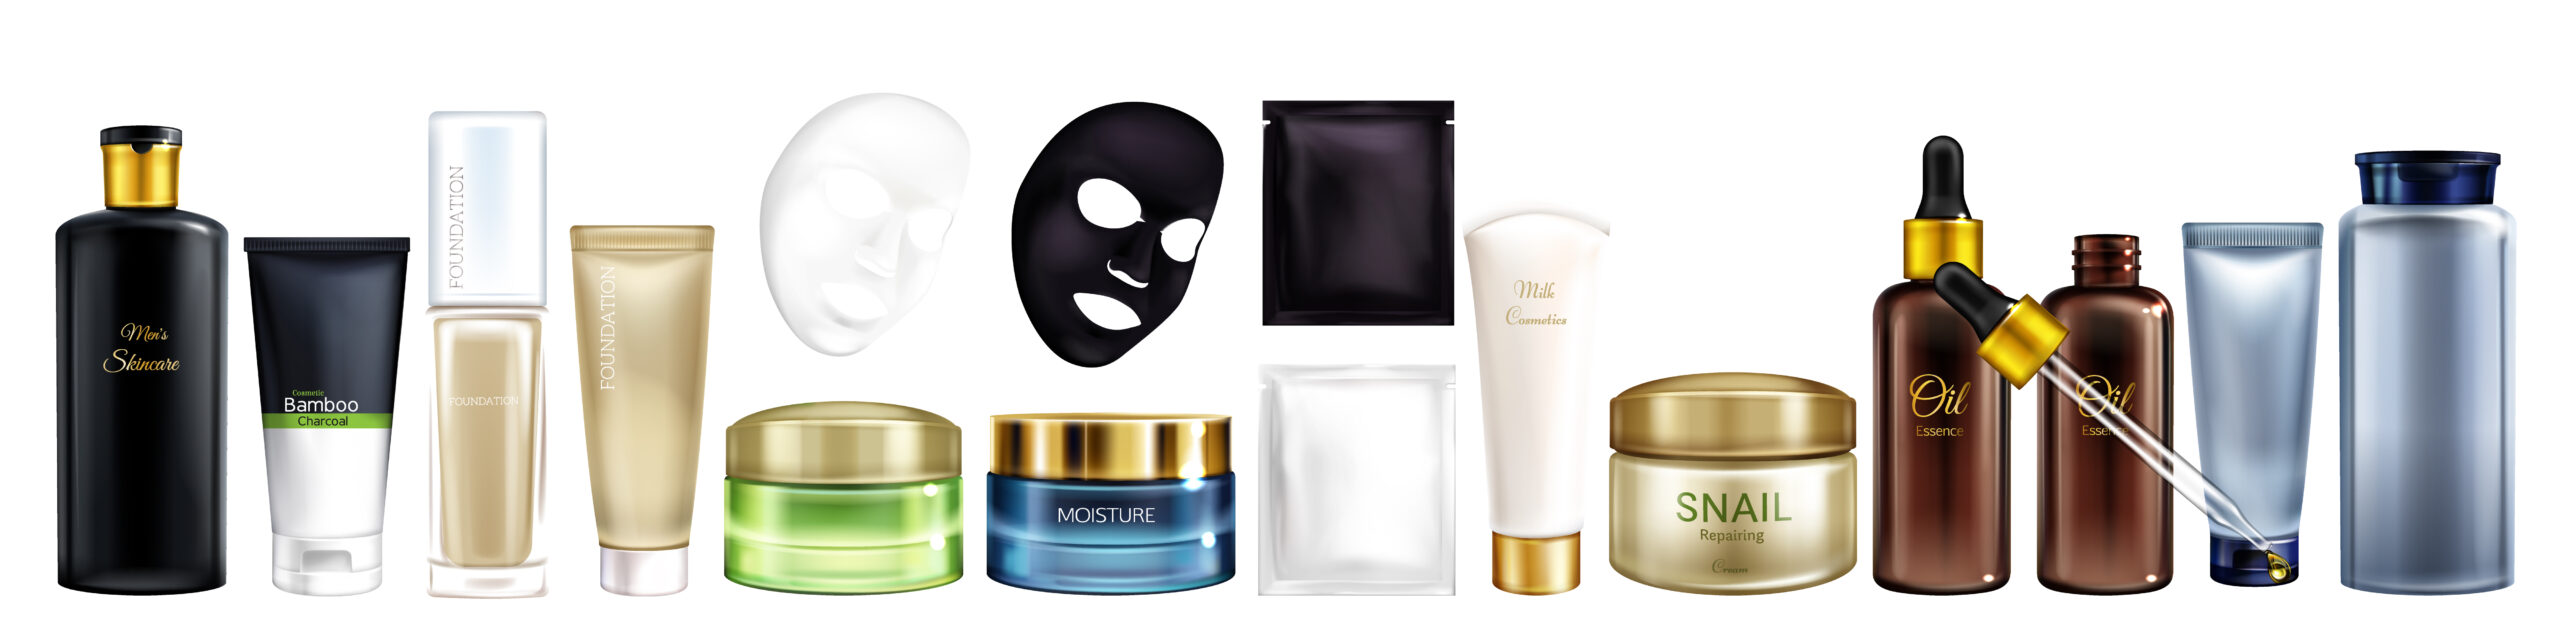 How to buy the best skin care products as per your skin type? 